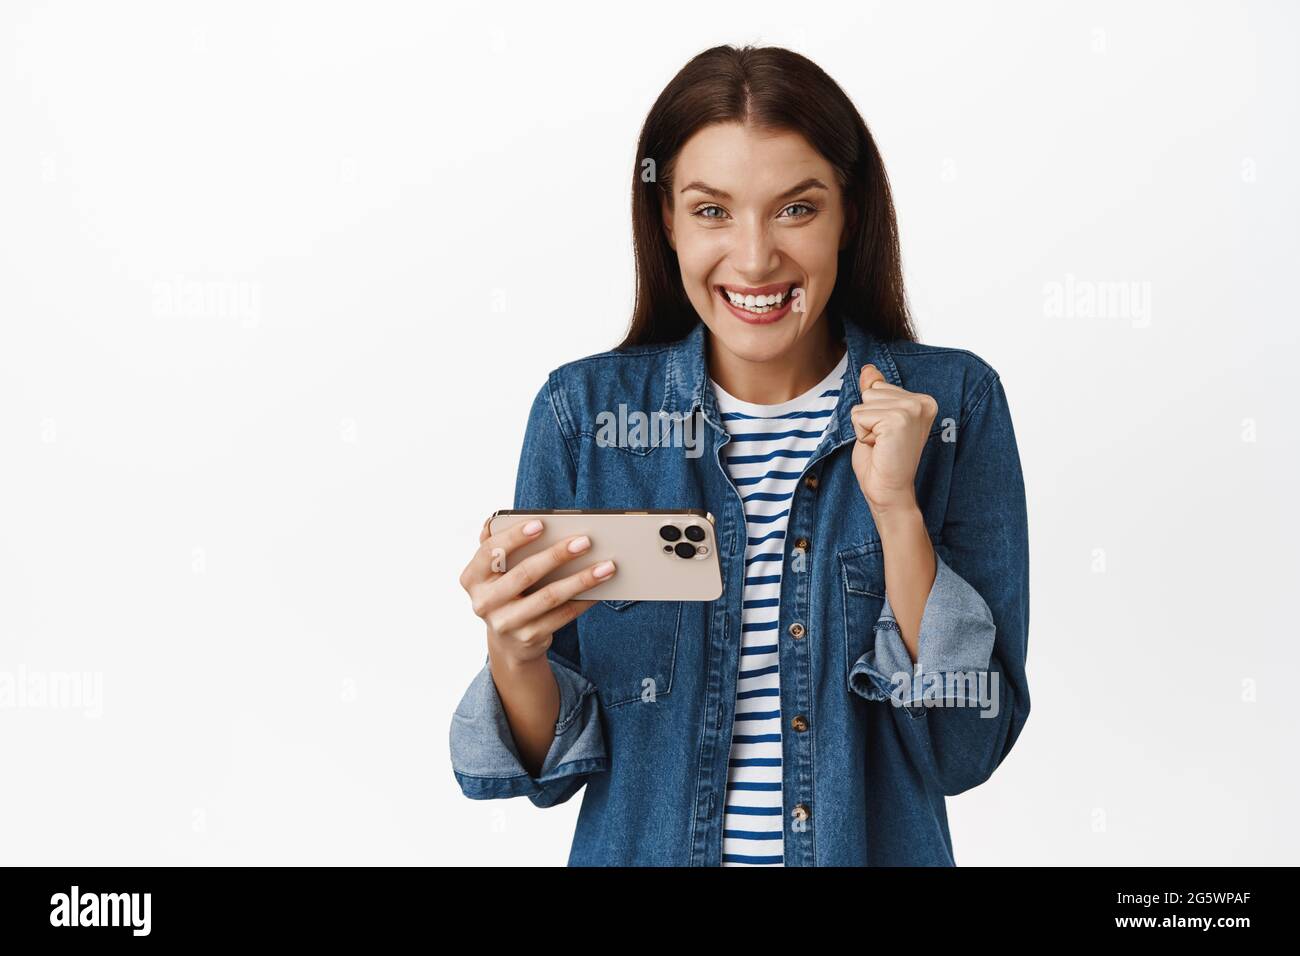 Happy brunette woman winning money on phone, playing mobile video game and rejoicing, celebrating goal achievement in app, standing against white Stock Photo